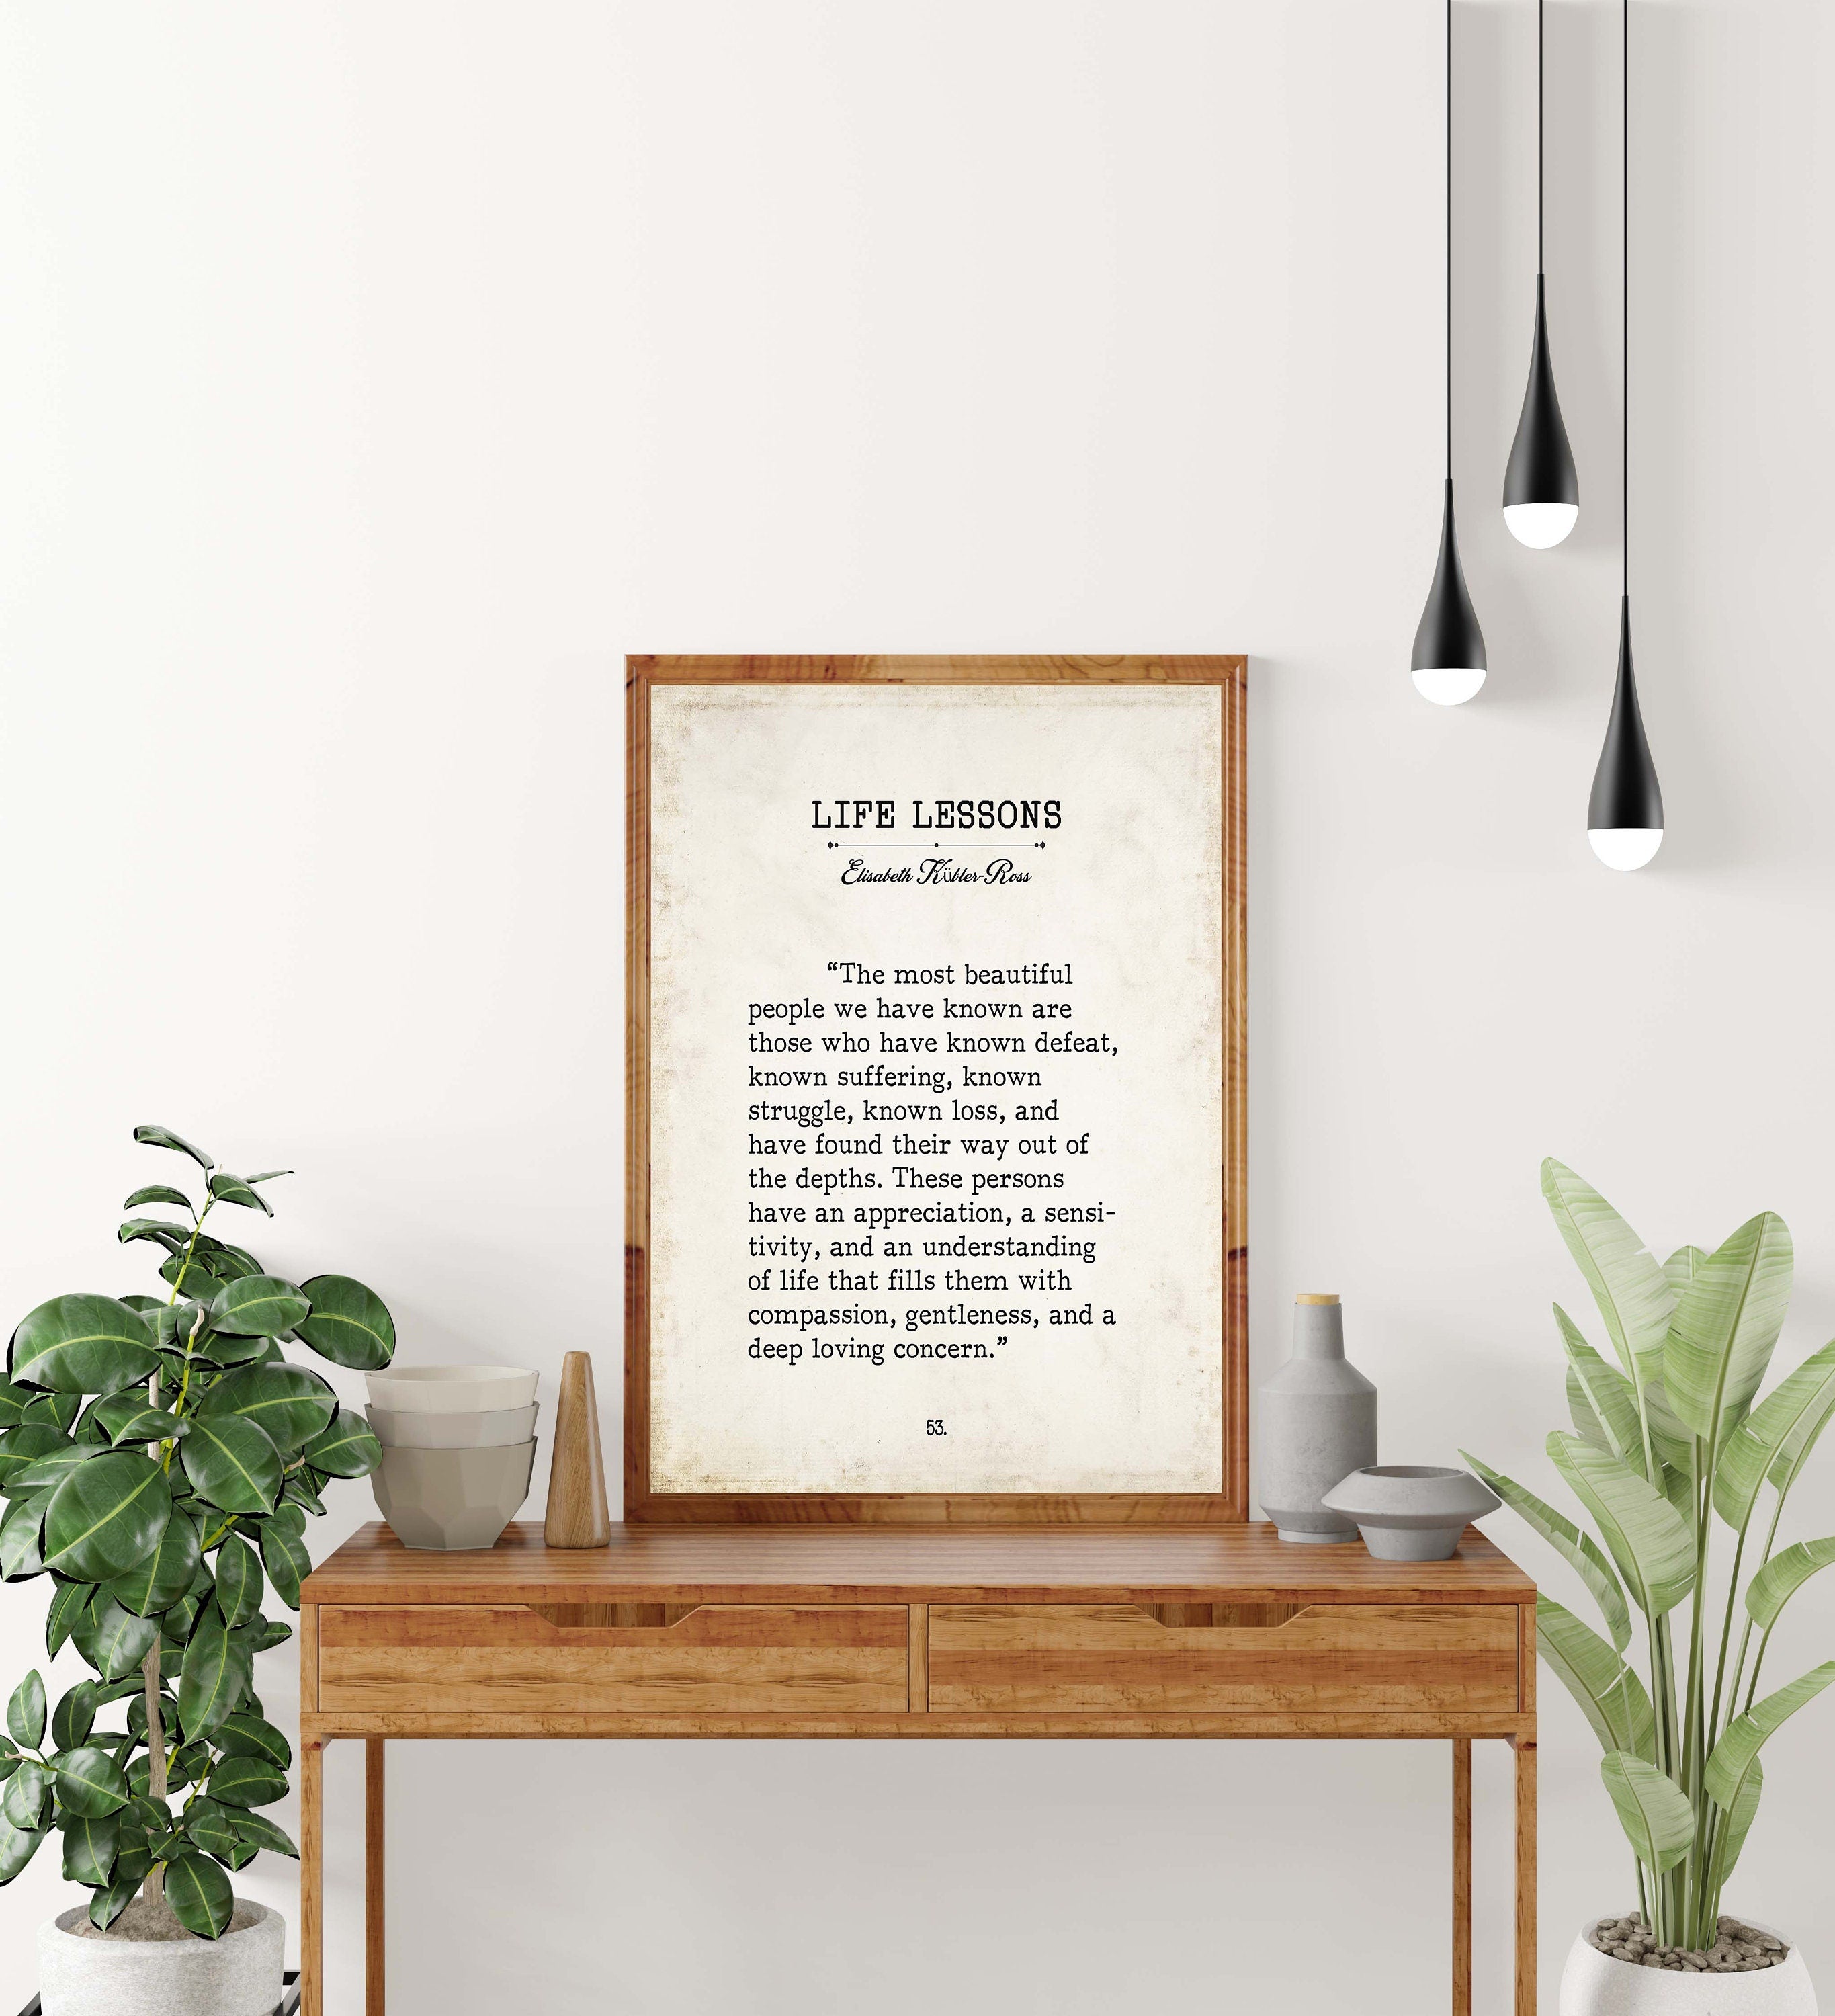 Elisabeth Kubler-Ross, The Most Beautiful People Book Page Inspirational Wall Art